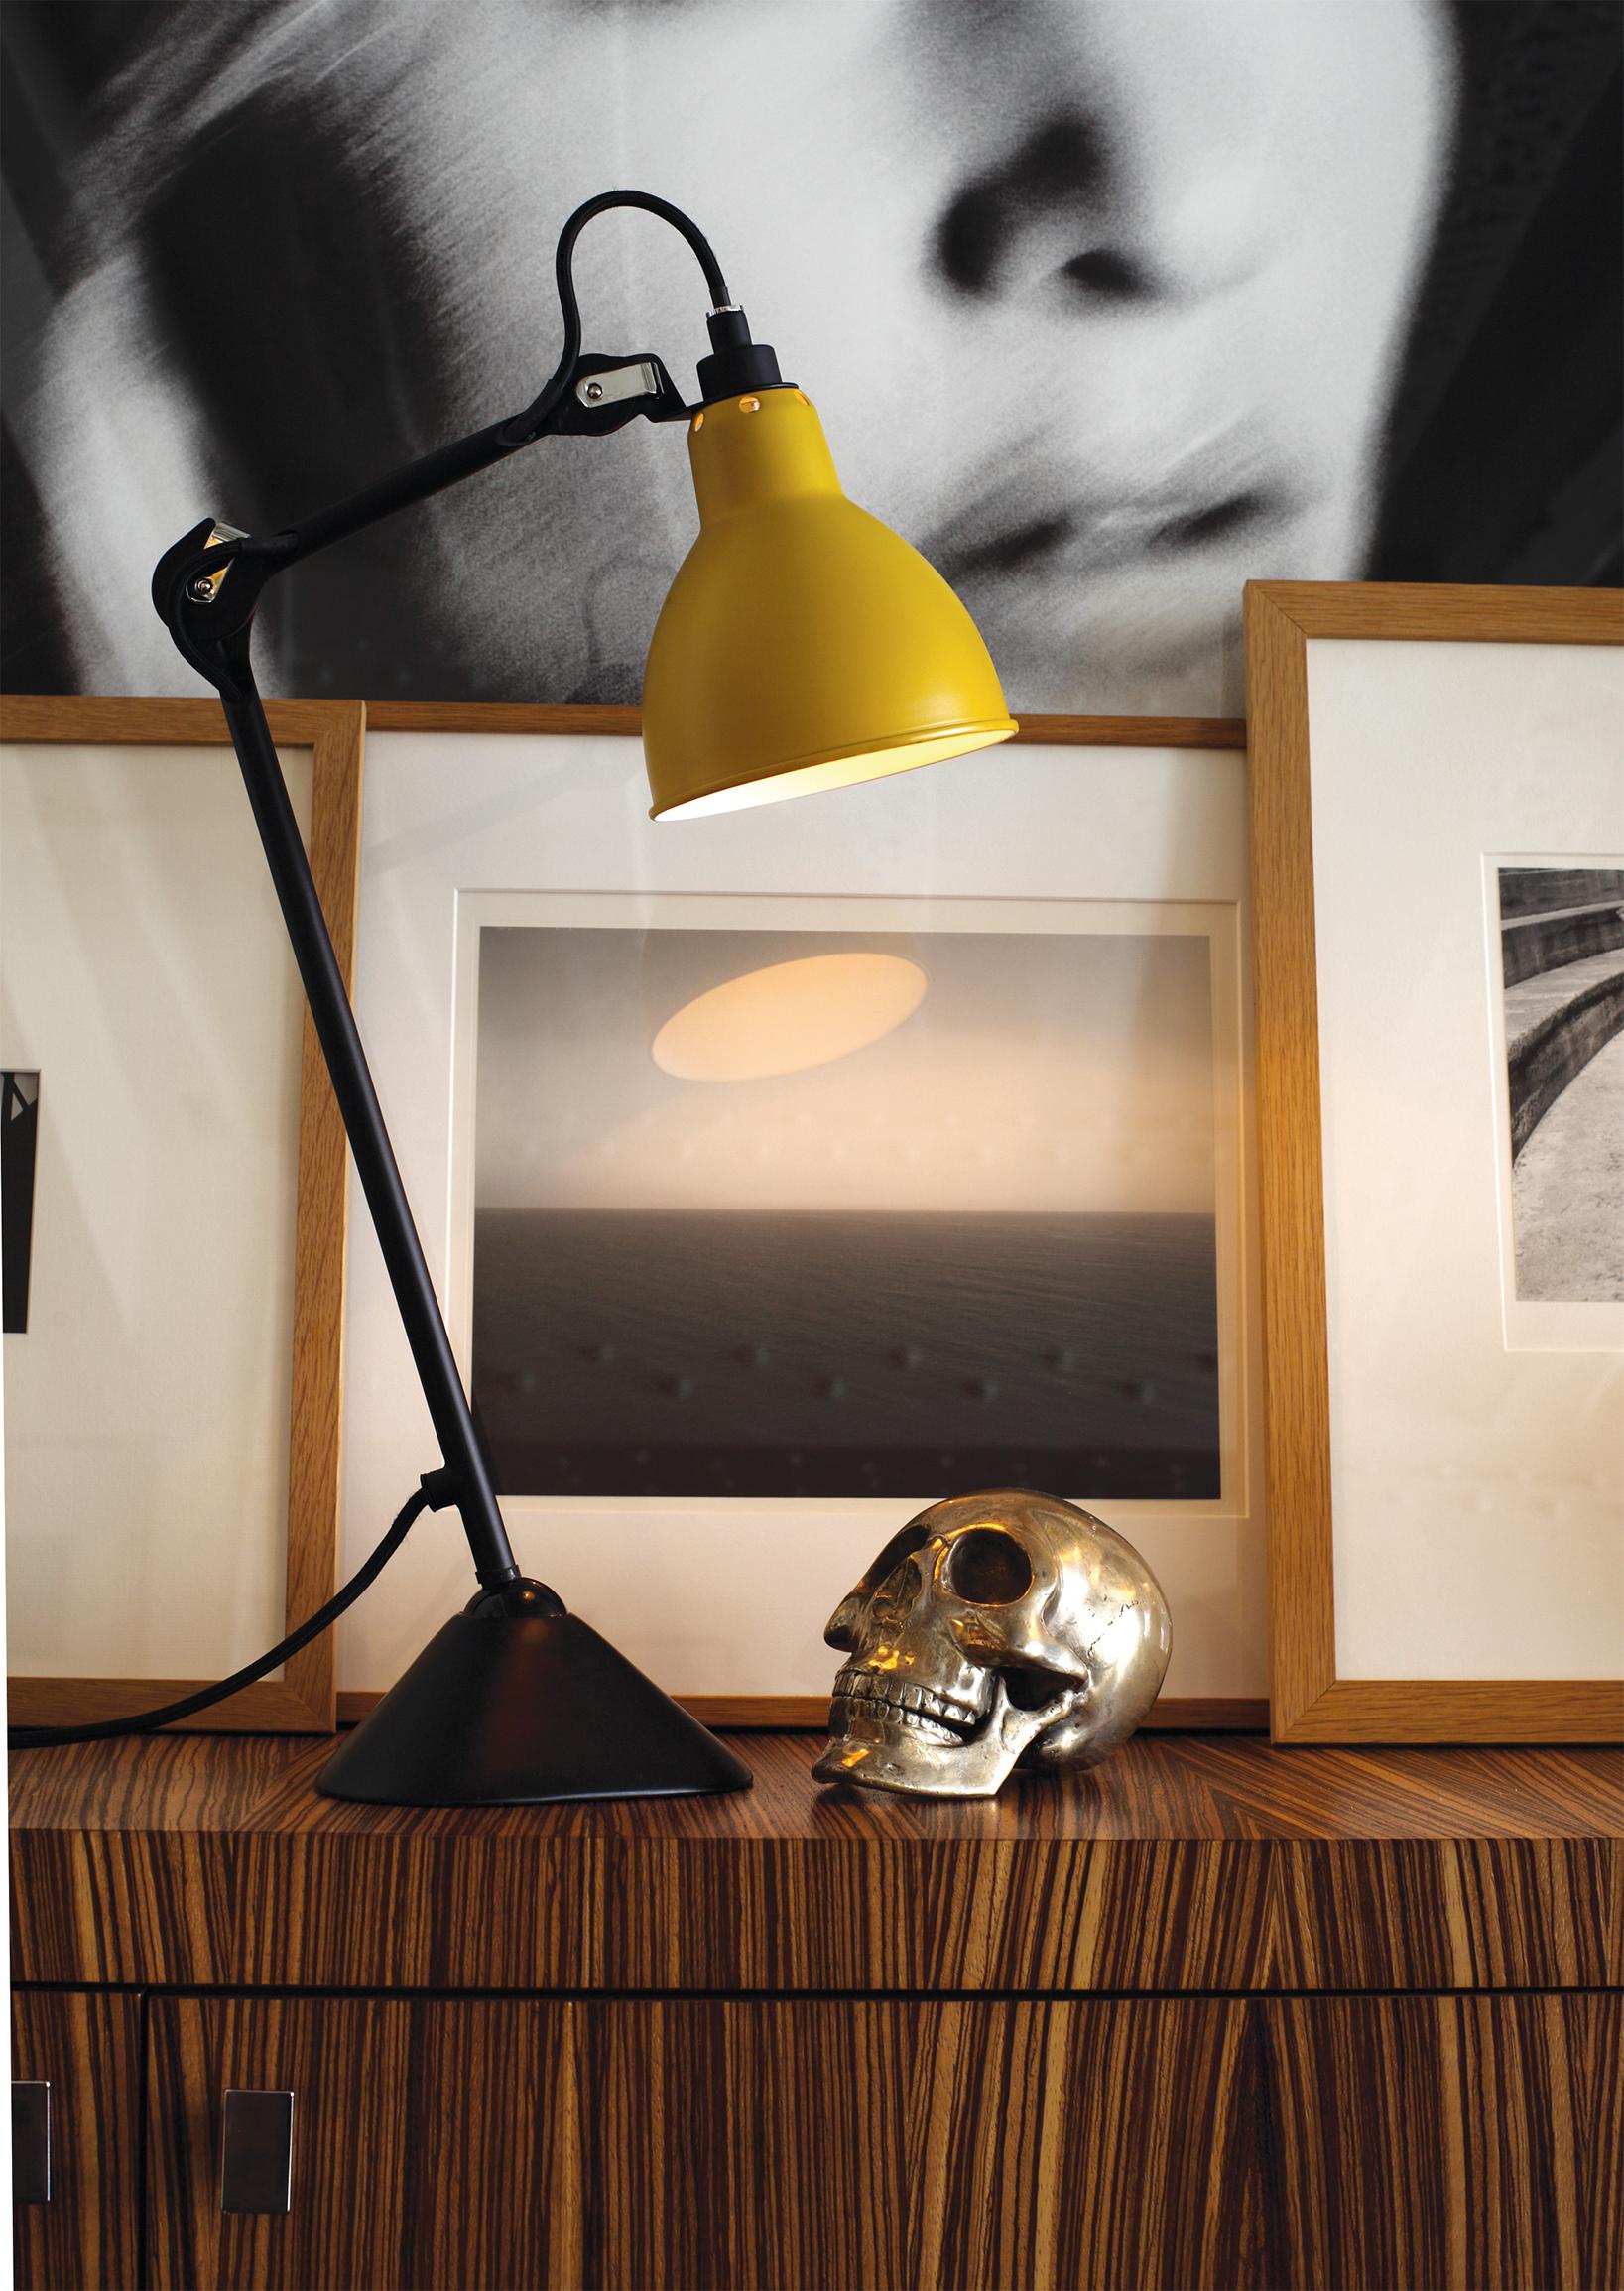 Yellow lampe Gras N° 205 Table Lamp by Bernard-Albin Gras
Dimensions: D 17.5 x W 14 x H 39 cm
Materials: Steel
Also available: Different colors and other shade available.

All our lamps can be wired according to each country. If sold to the USA